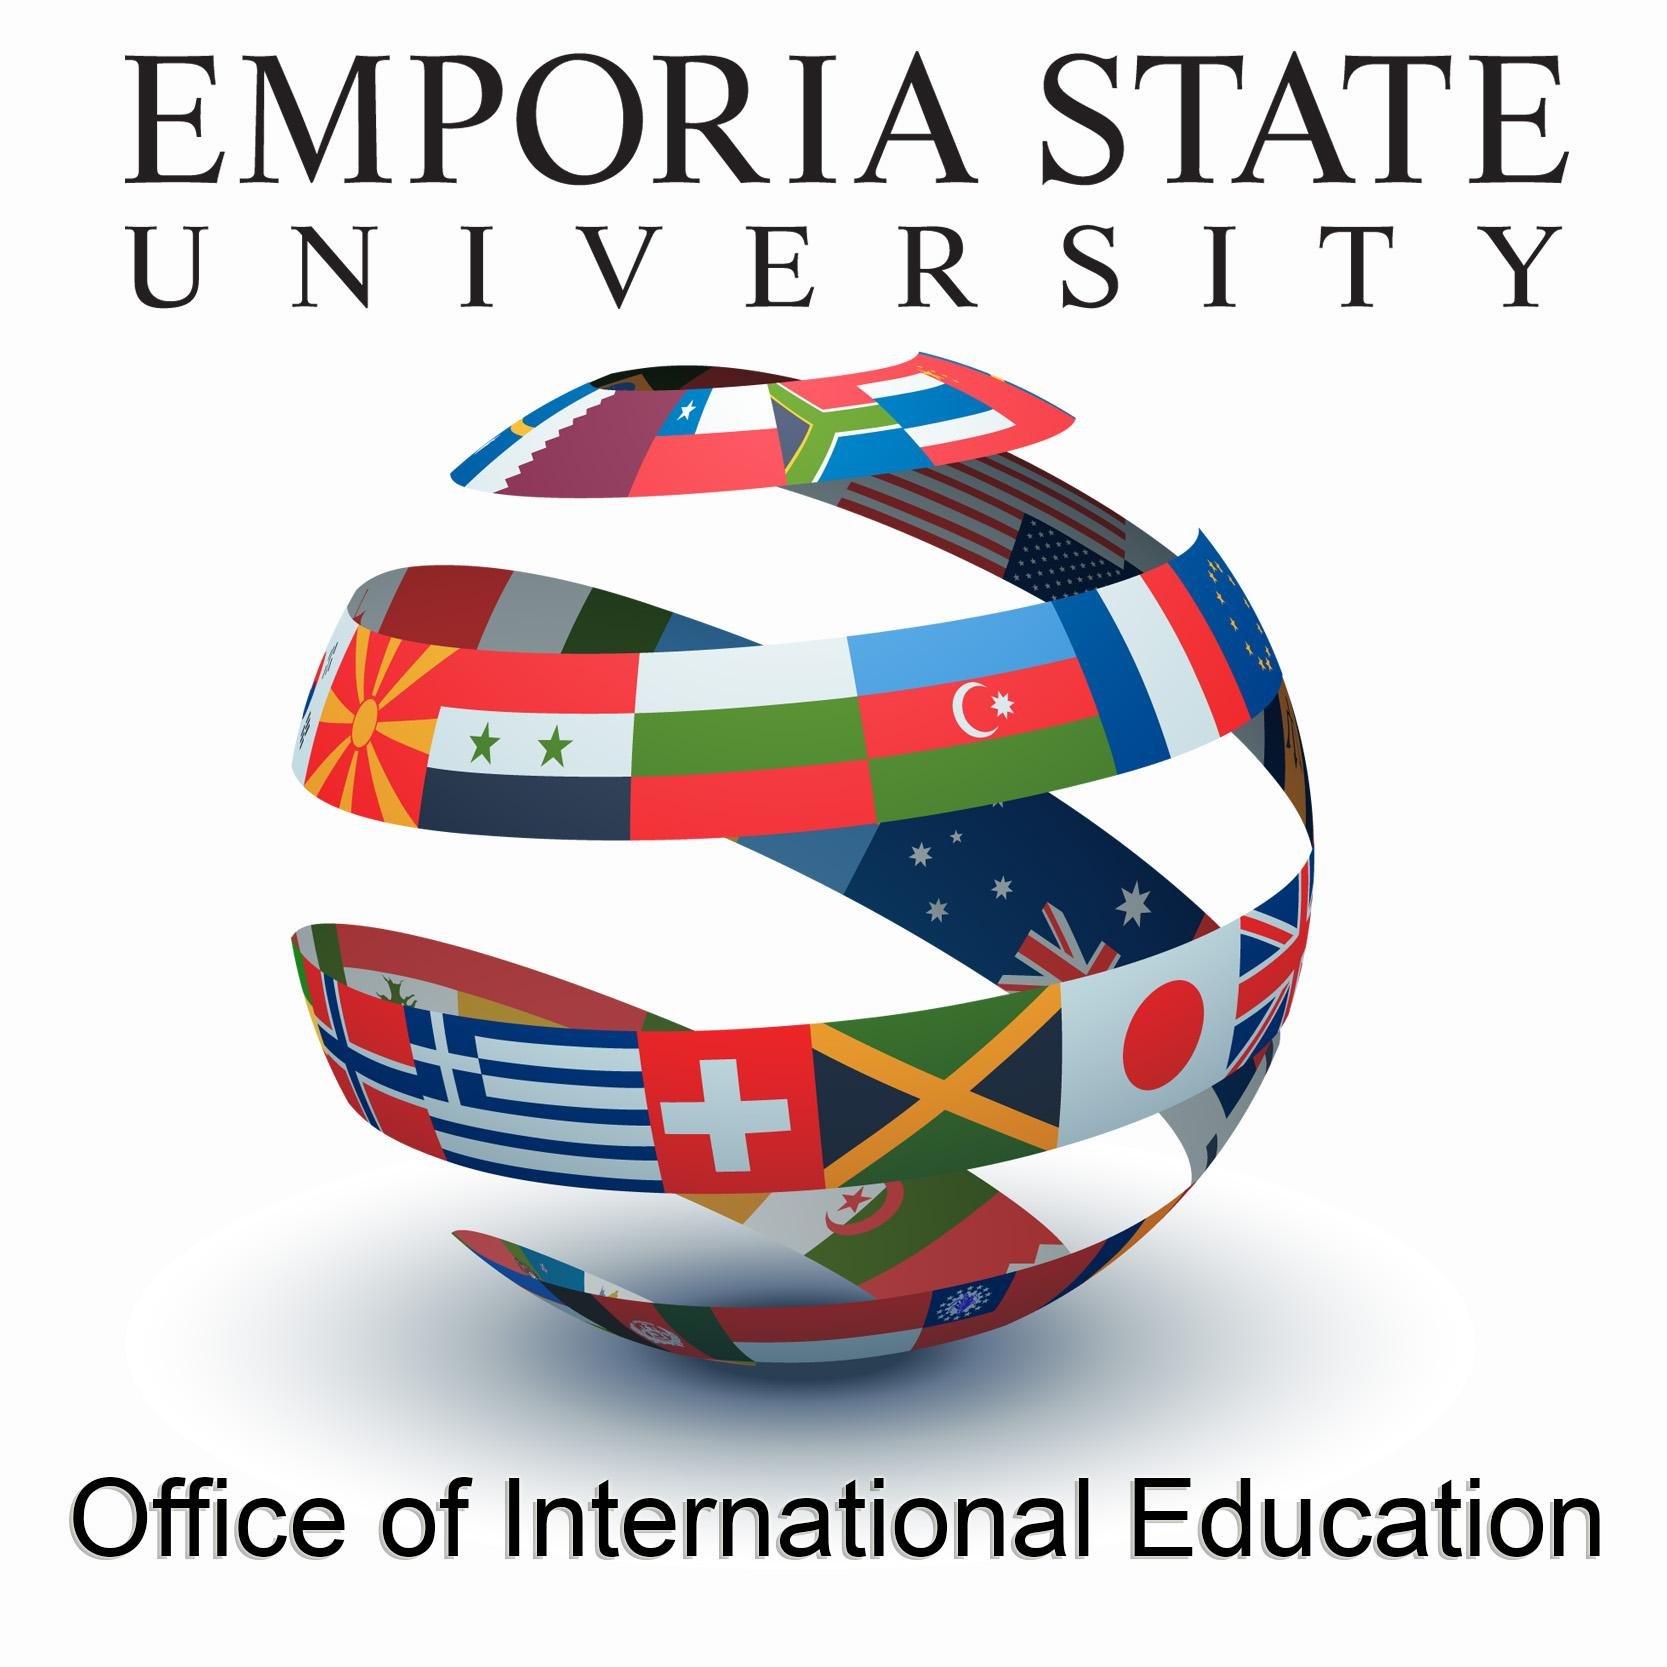 Making Emporia State University a globally-focused University.